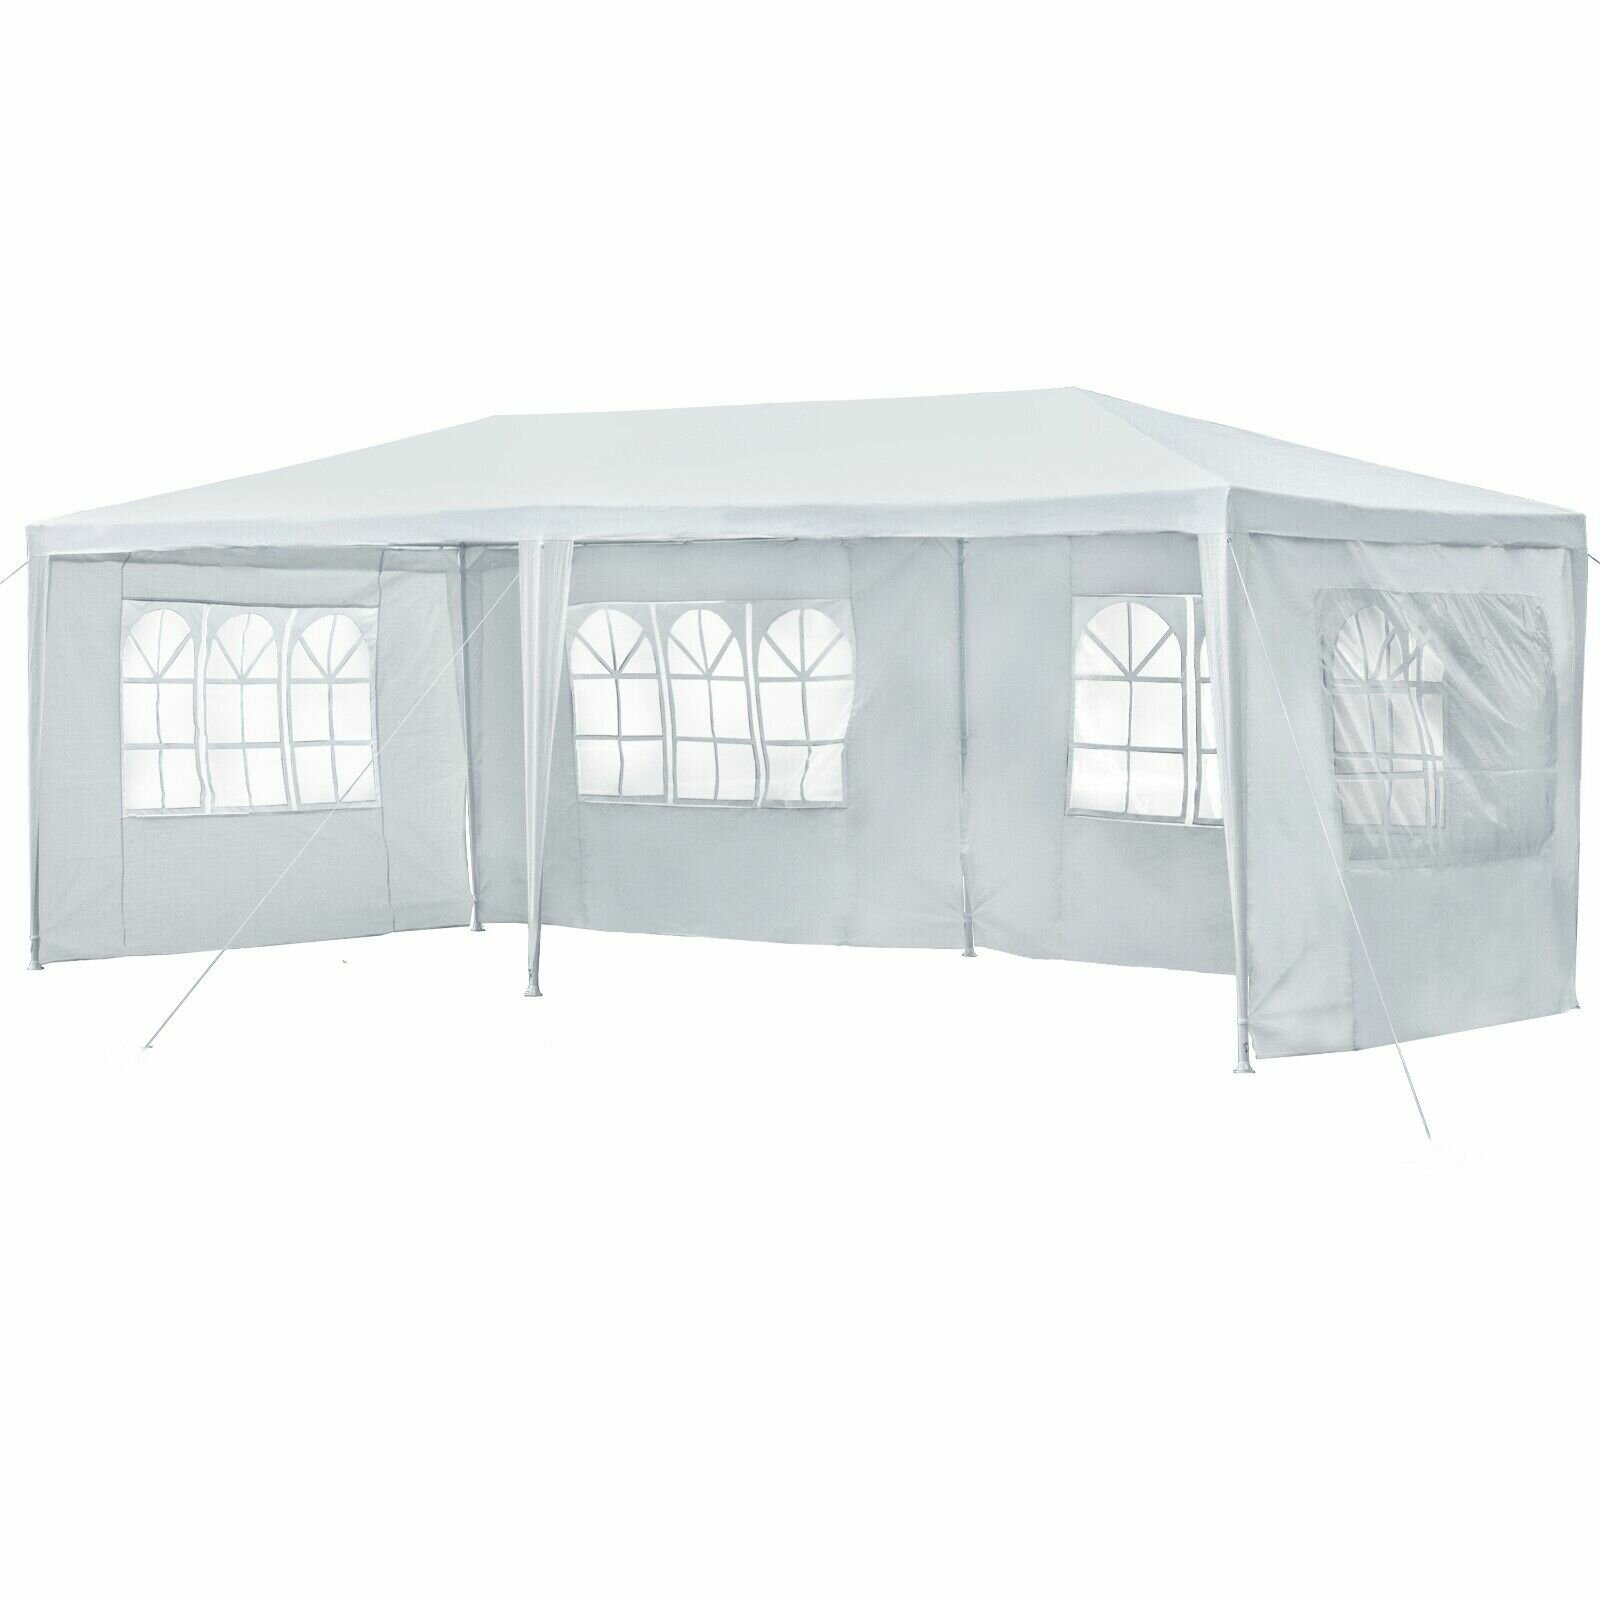 10x20ft Canopy Side Wall 210D Waterproof Gazebo Shelter Shade With Windows Outdoor Easy Party Tent Without Top